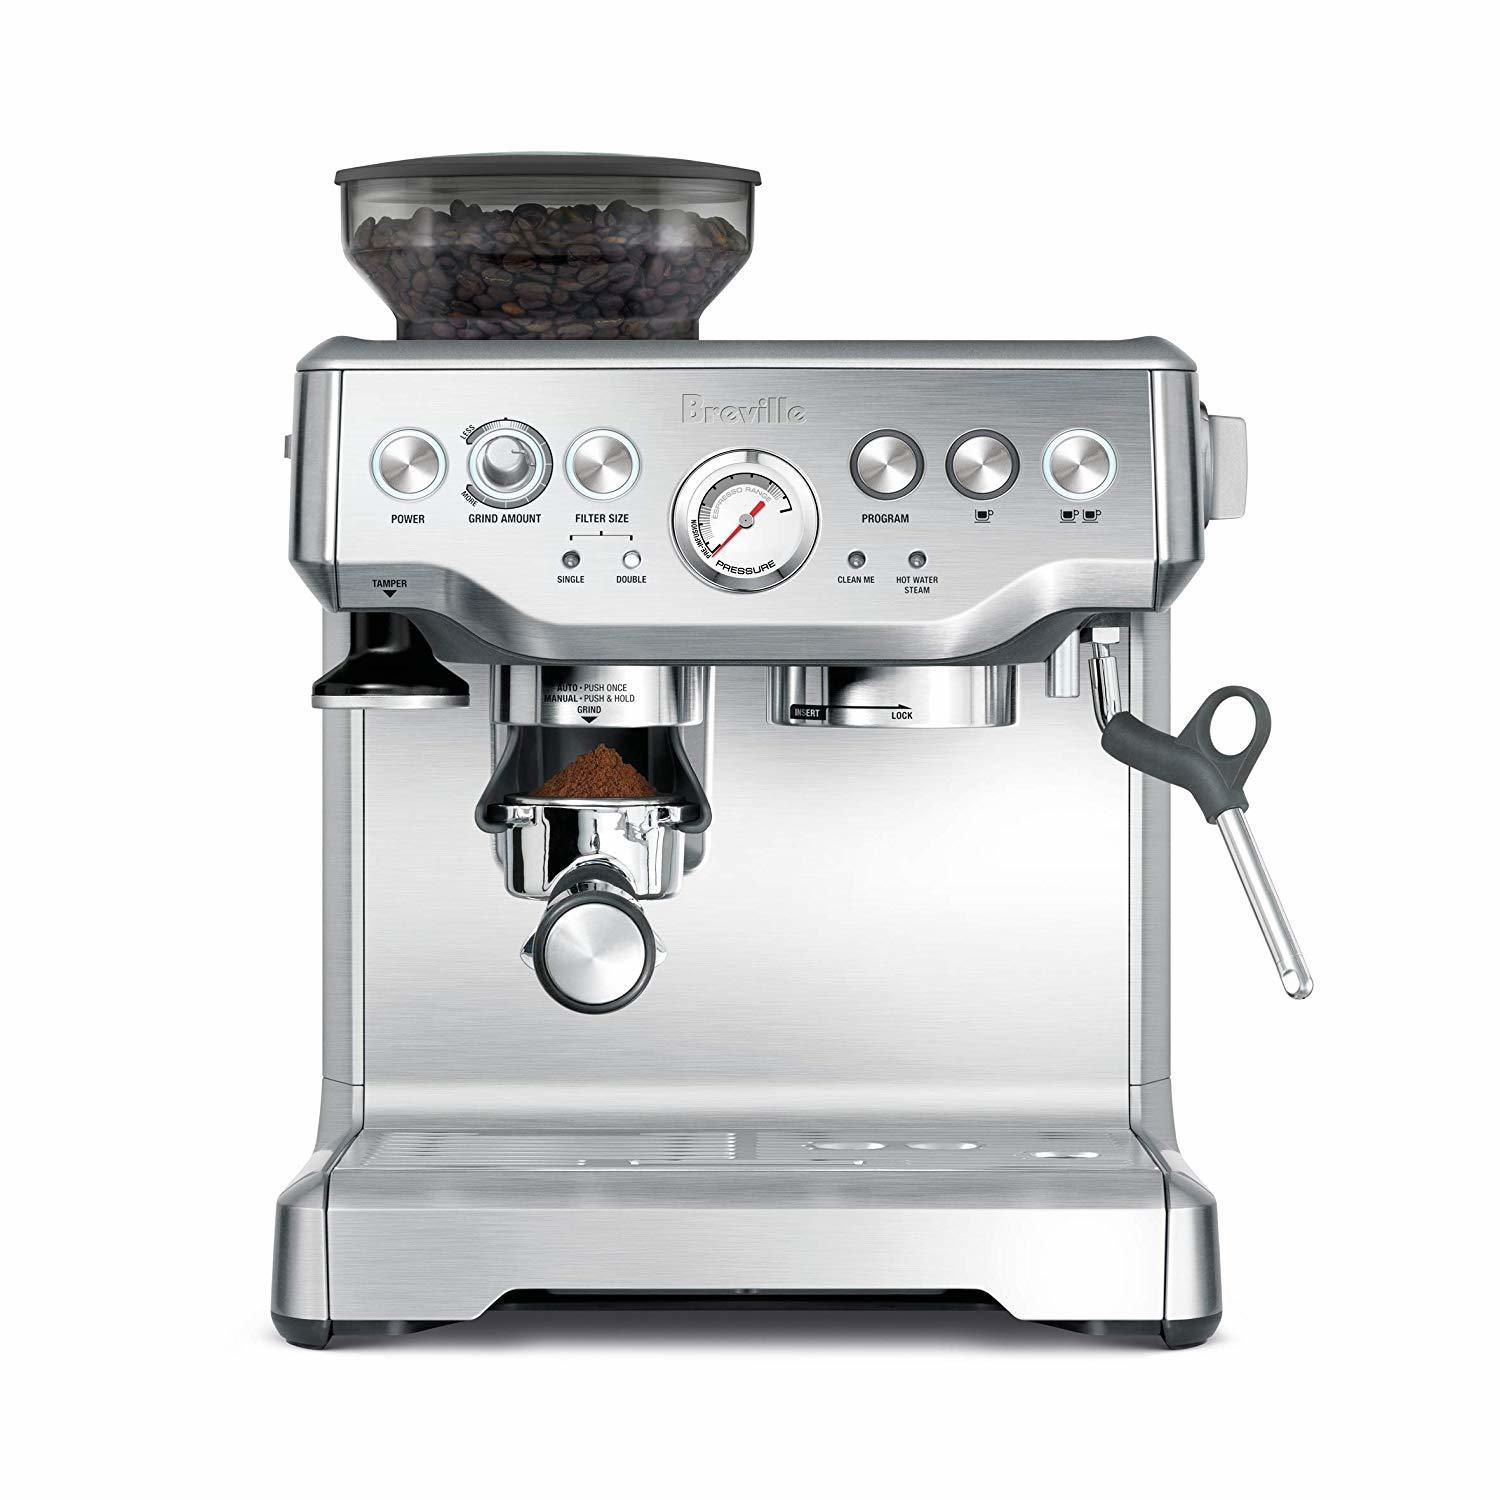 Breville Barista Express from Amazon US and Australia